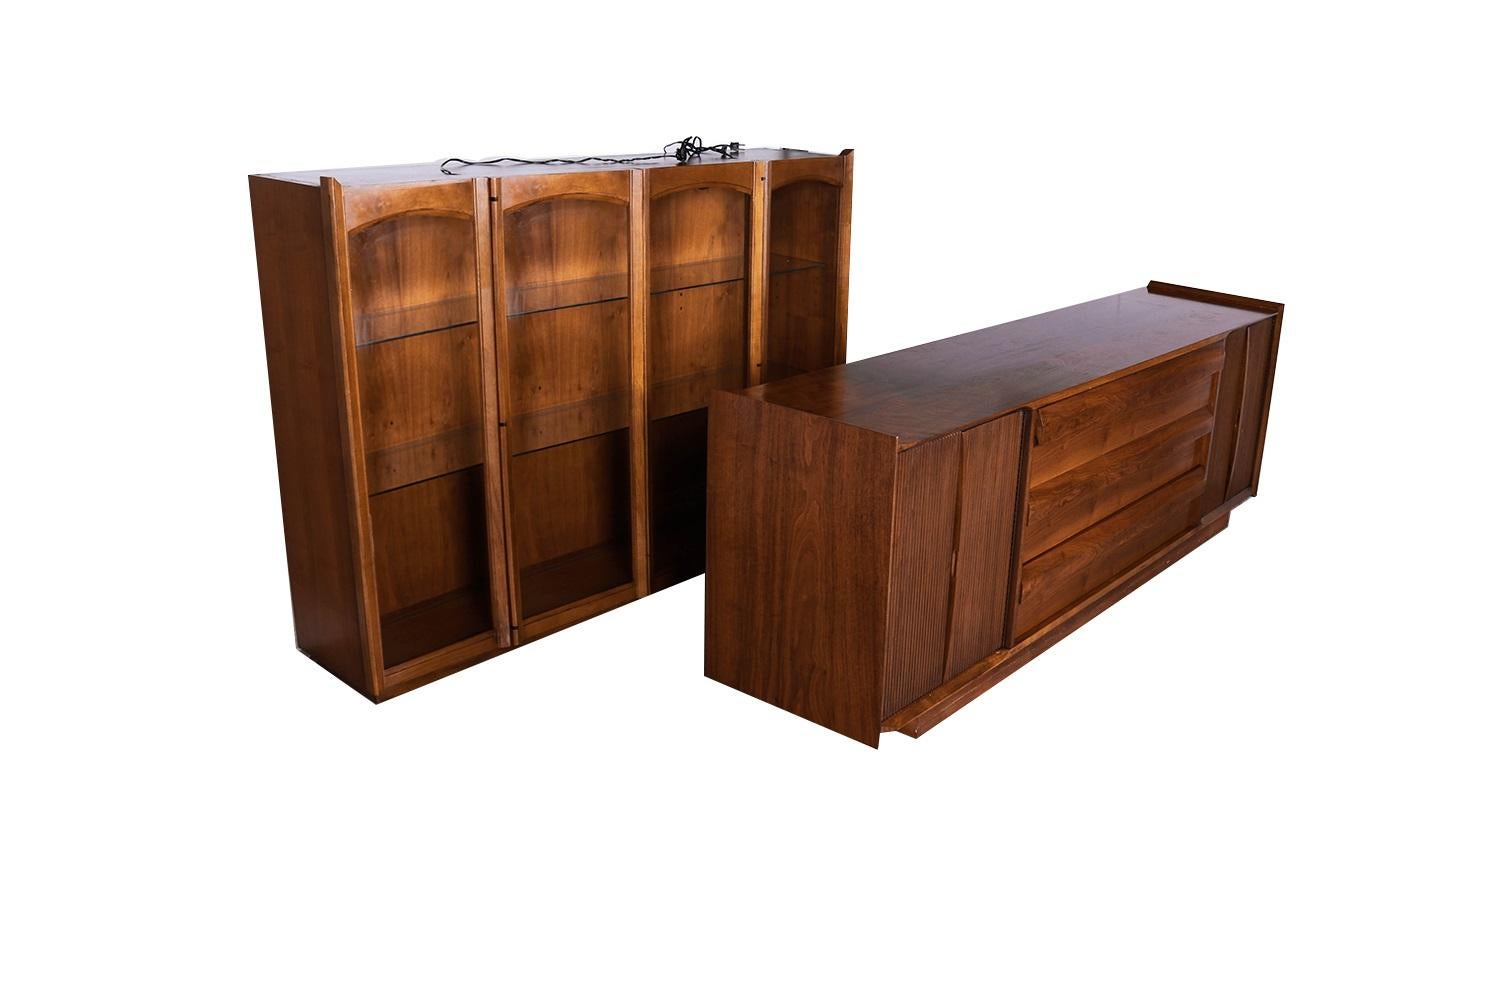 An elegant long Lane First Edition Mid-Century Modern sculpted walnut credenza/sideboard with detachable lighted hutch. This is a beautiful example of mid-century craftsmanship by Lane Furniture Scandia line, First Edition Buffet Credenza, lighted